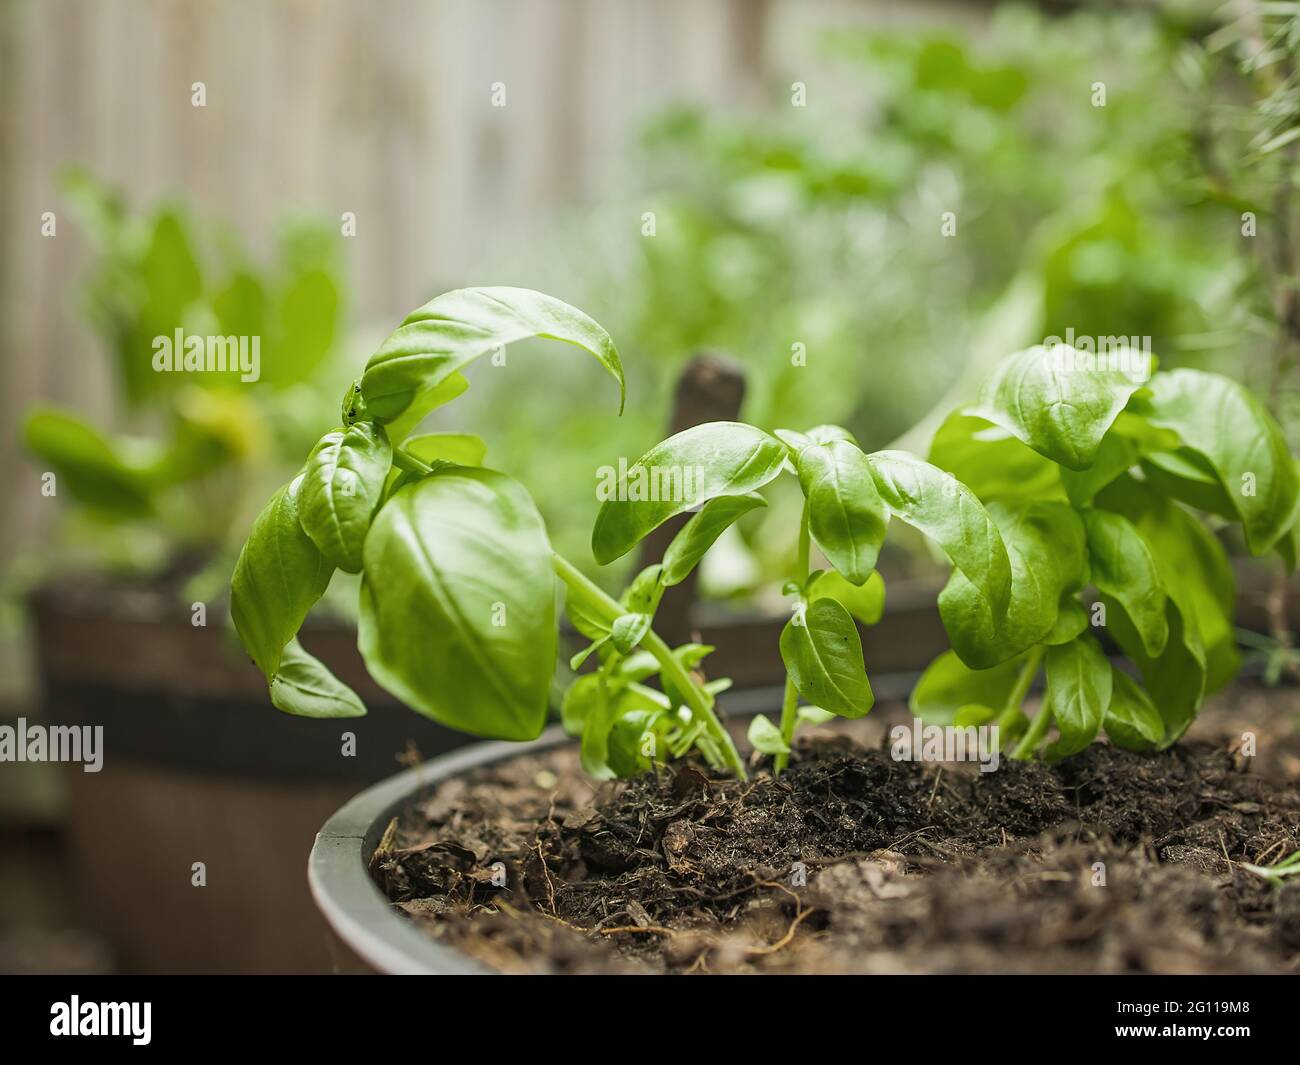 Wooden pot with a variety of fresh green potted culinary herbs growing outdoors in a backyard garden Stock Photo